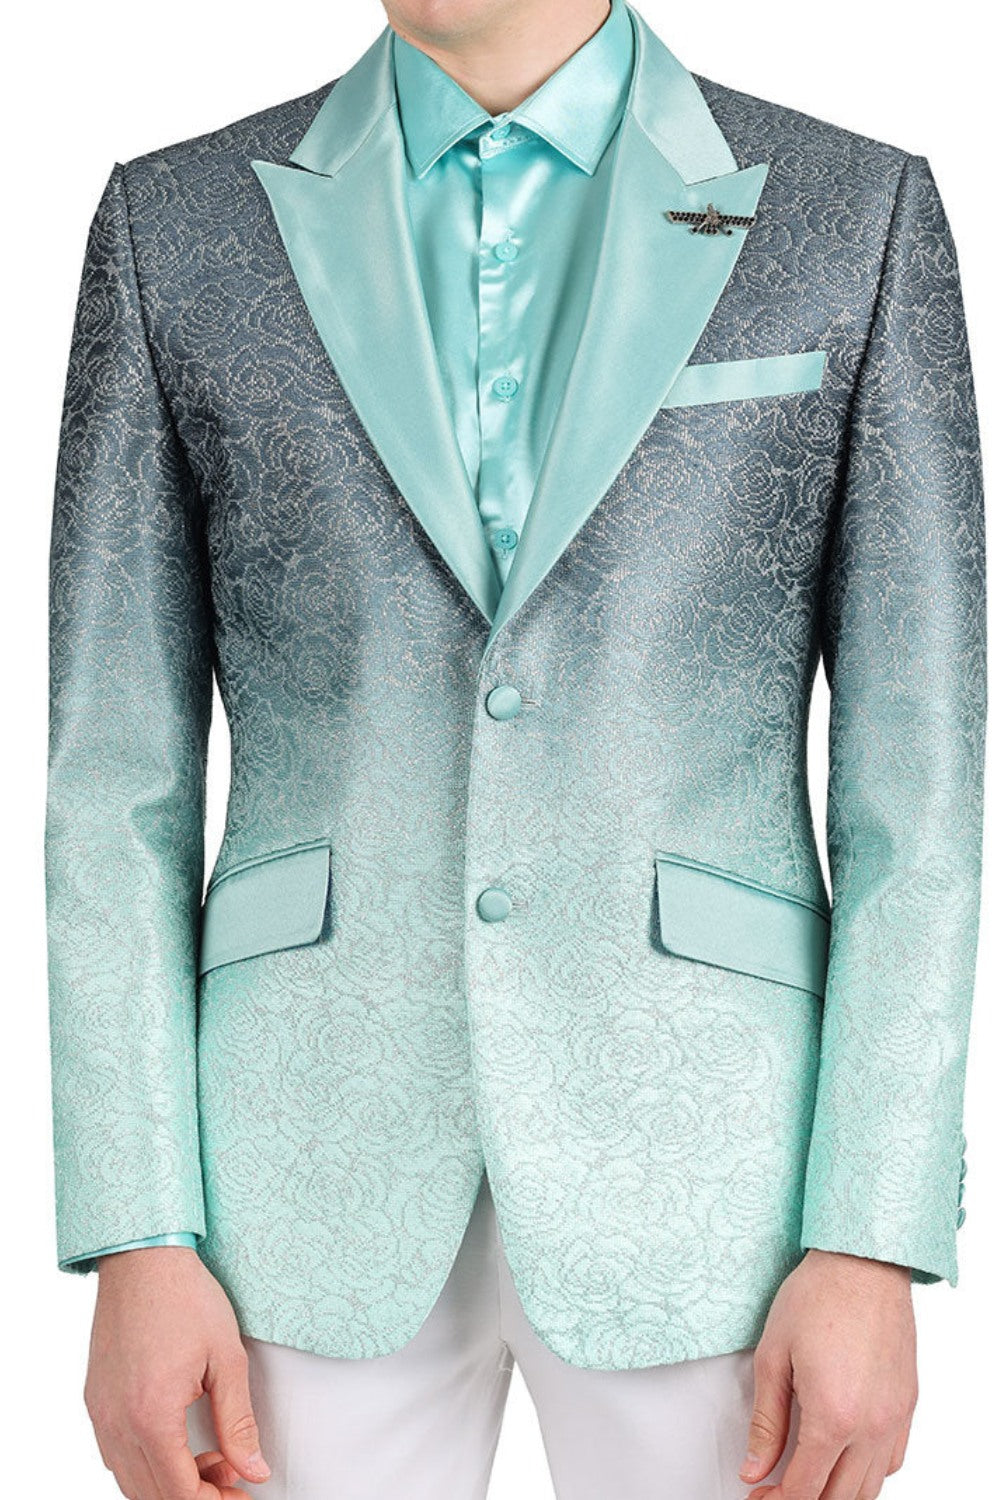 A stylish high school student wearing KCT Menswear's Dazzling Prom Blazer, showcasing its stunning two-tone pistachio fading effect, silver floral pattern, and gradient design - perfect for a memorable prom night.